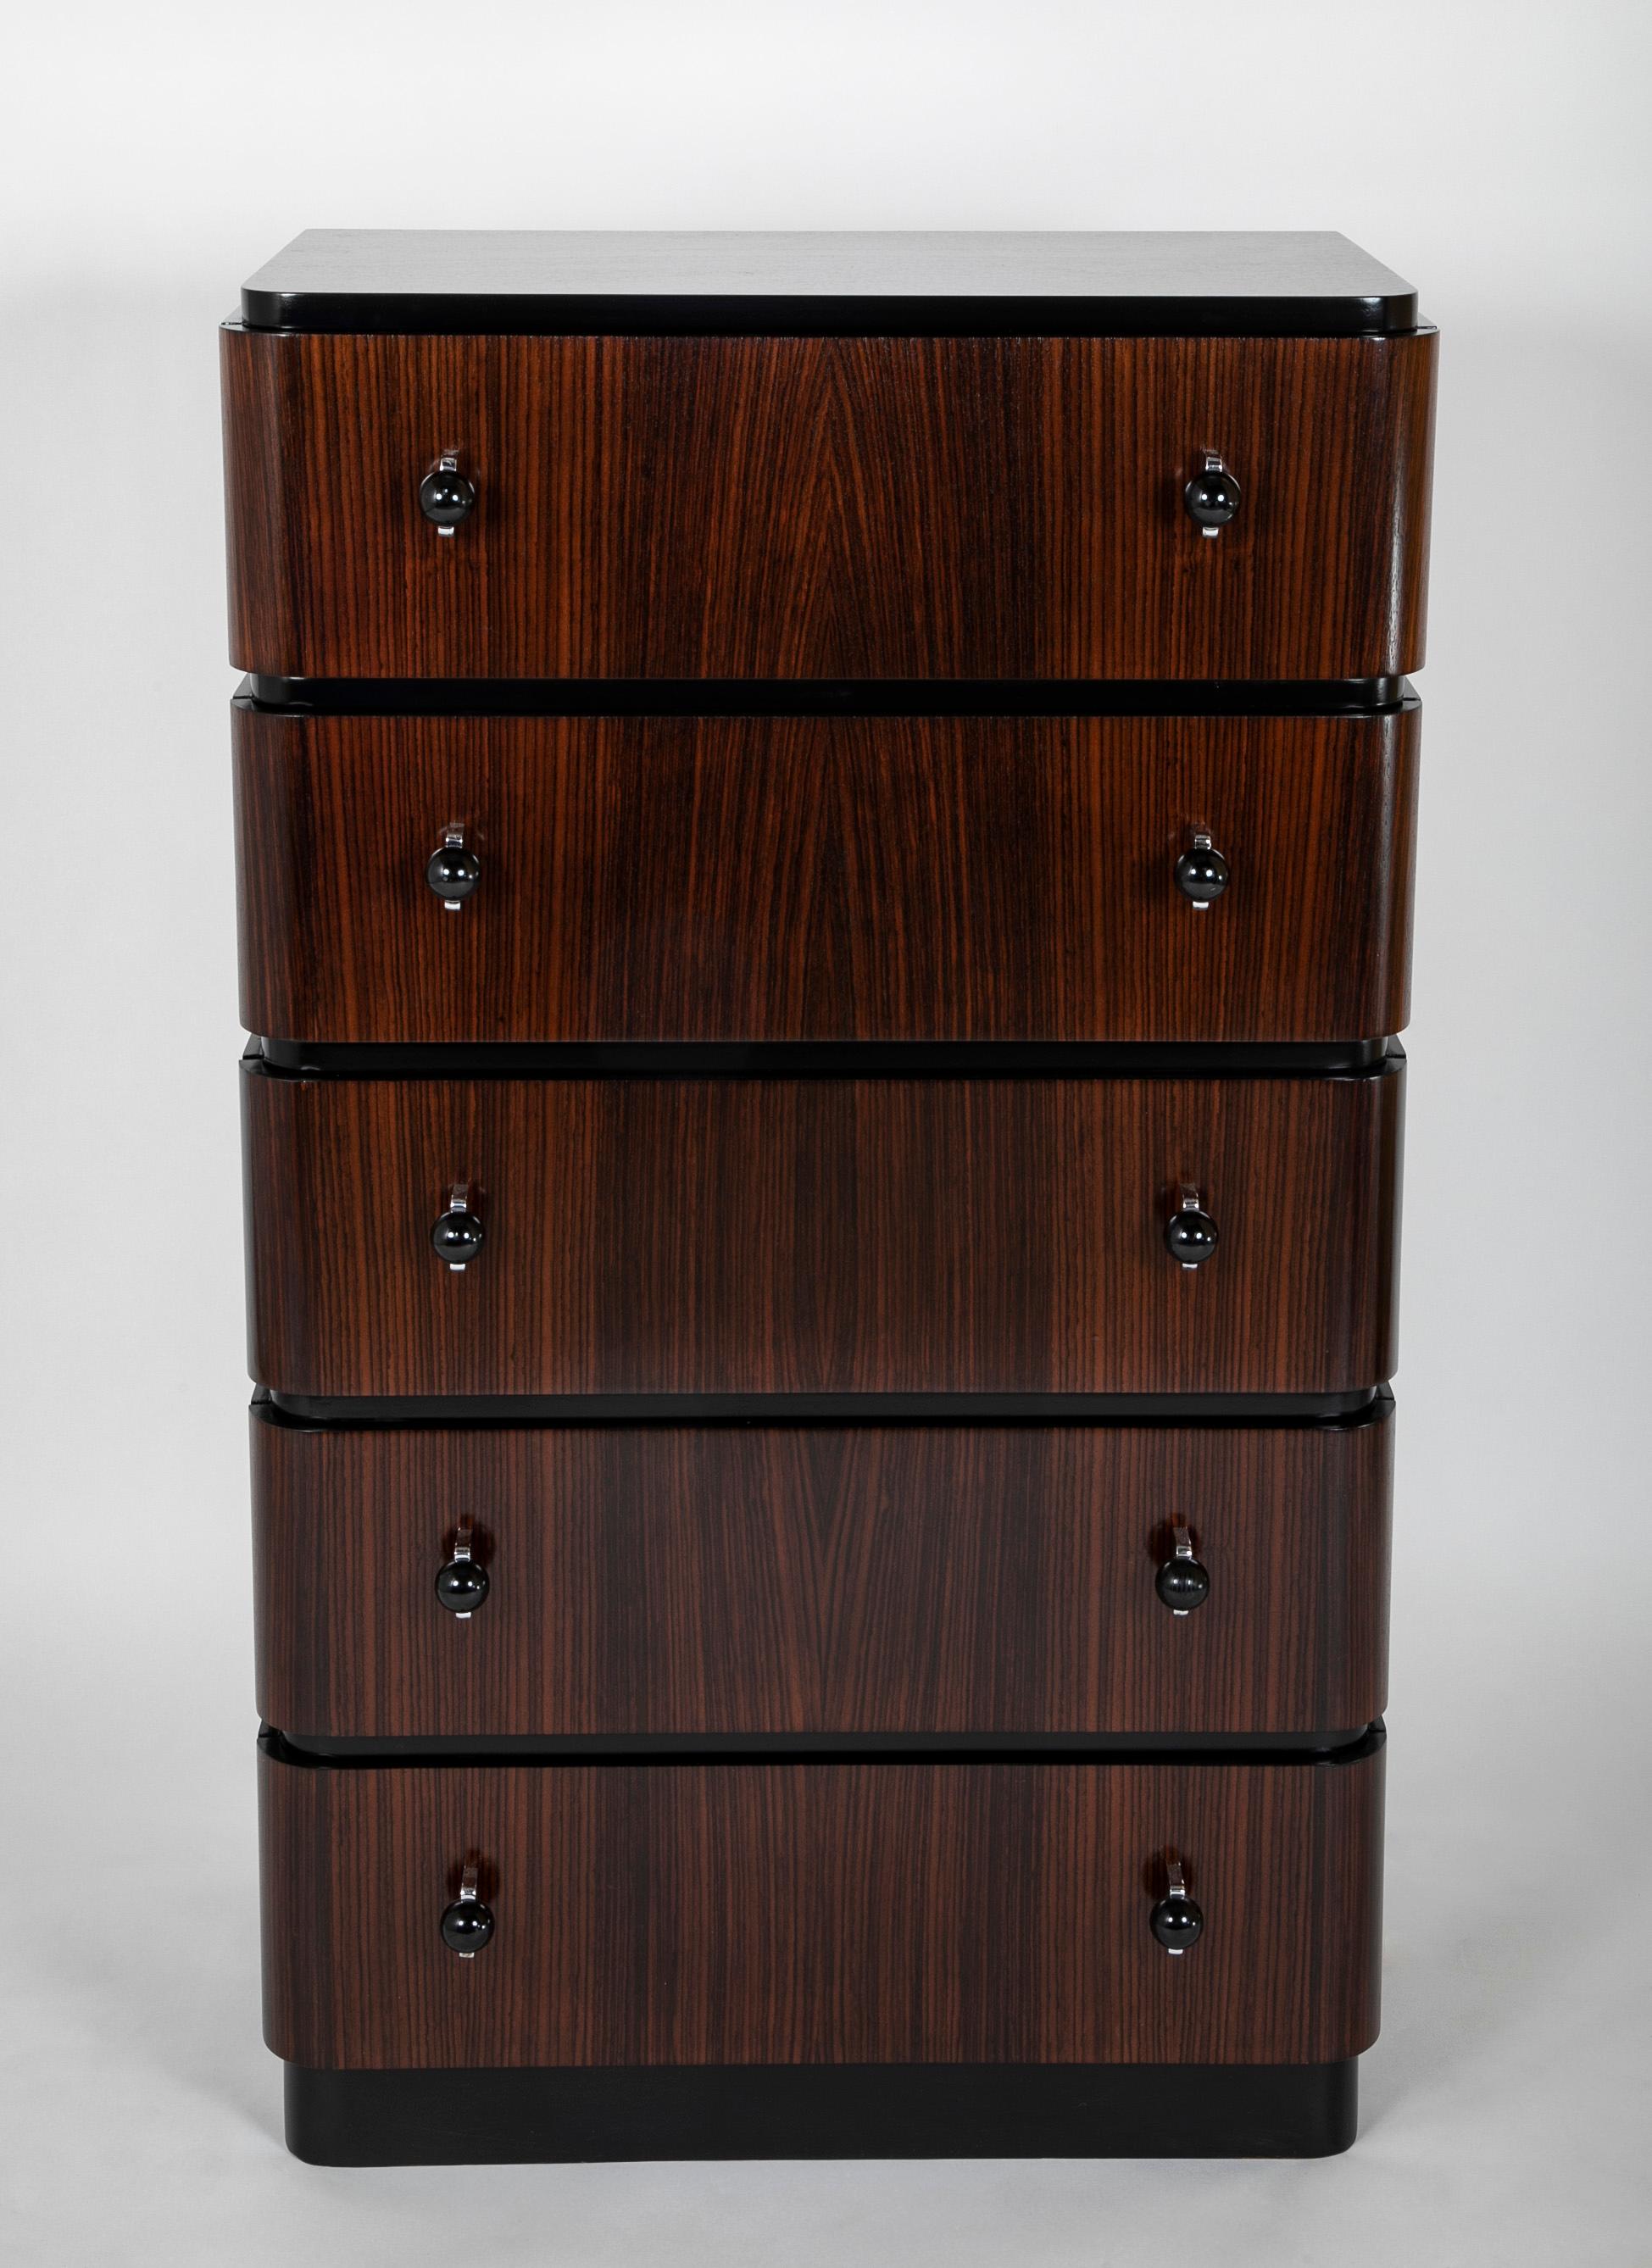 American A Striking Pair of Indian Rosewood Chests of Drawers by Donald Deskey